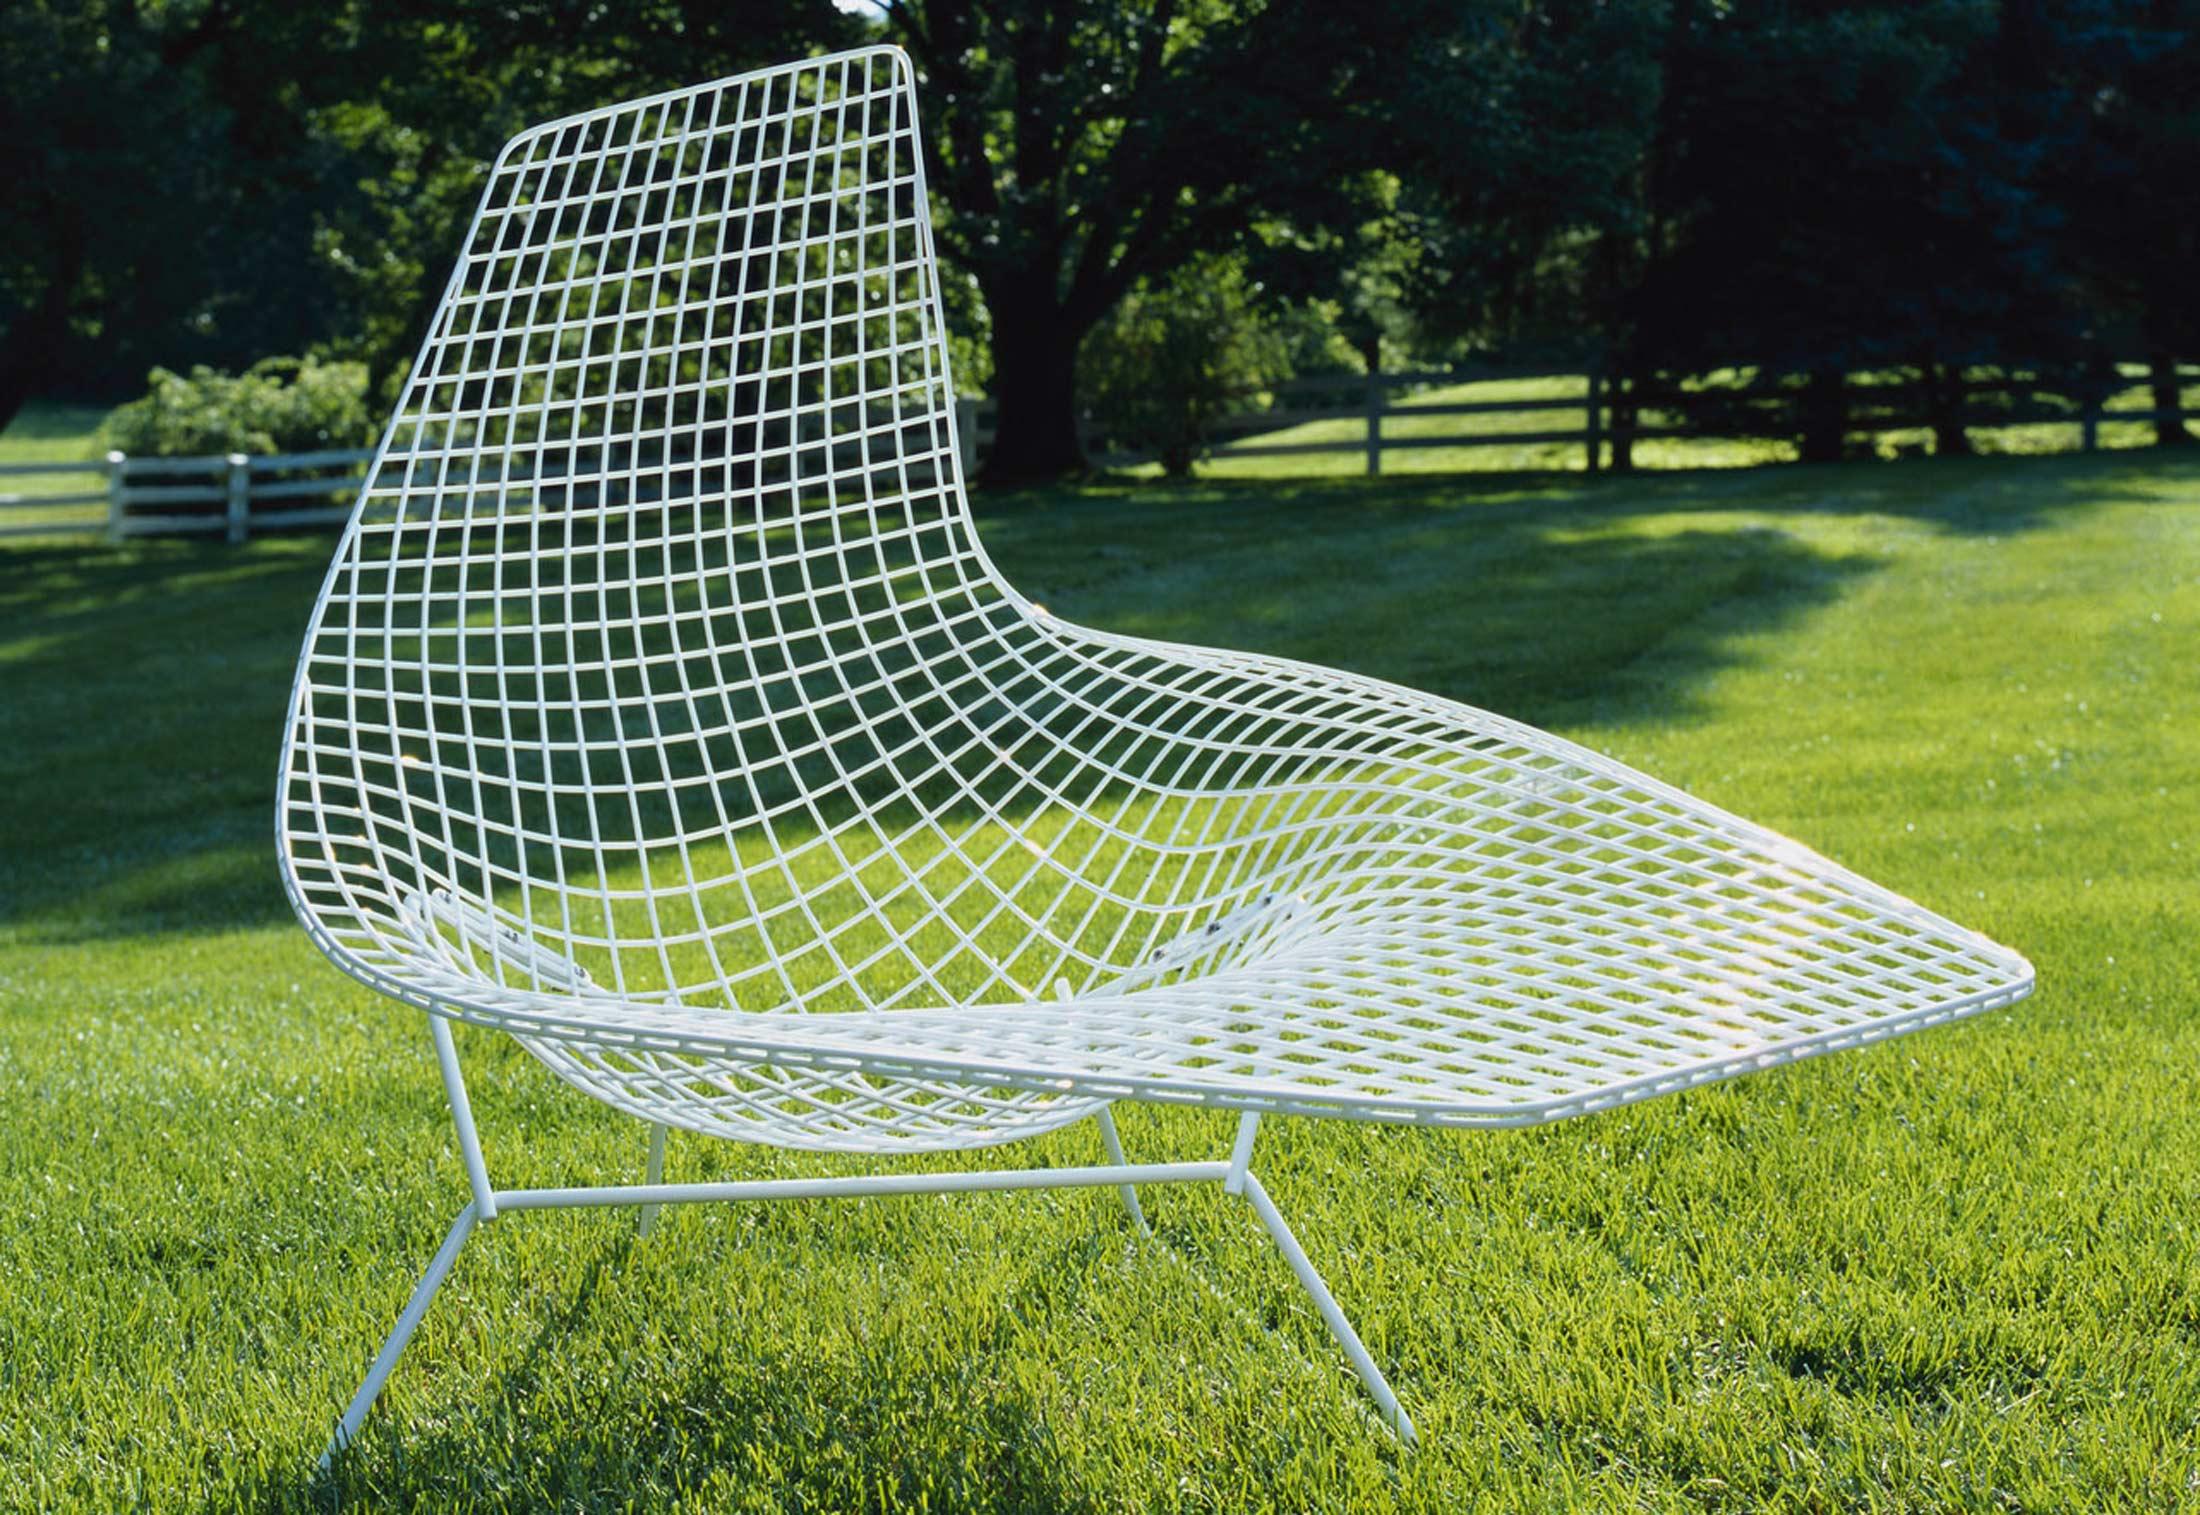 To create his iconic Bertoia Seating collection, Harry Bertoia transformed Industrial wire rods into new forms. The events that made this work possible began a decade earlier at Cranbrook Academy of Art, when he met Florence Knoll. Years later, the